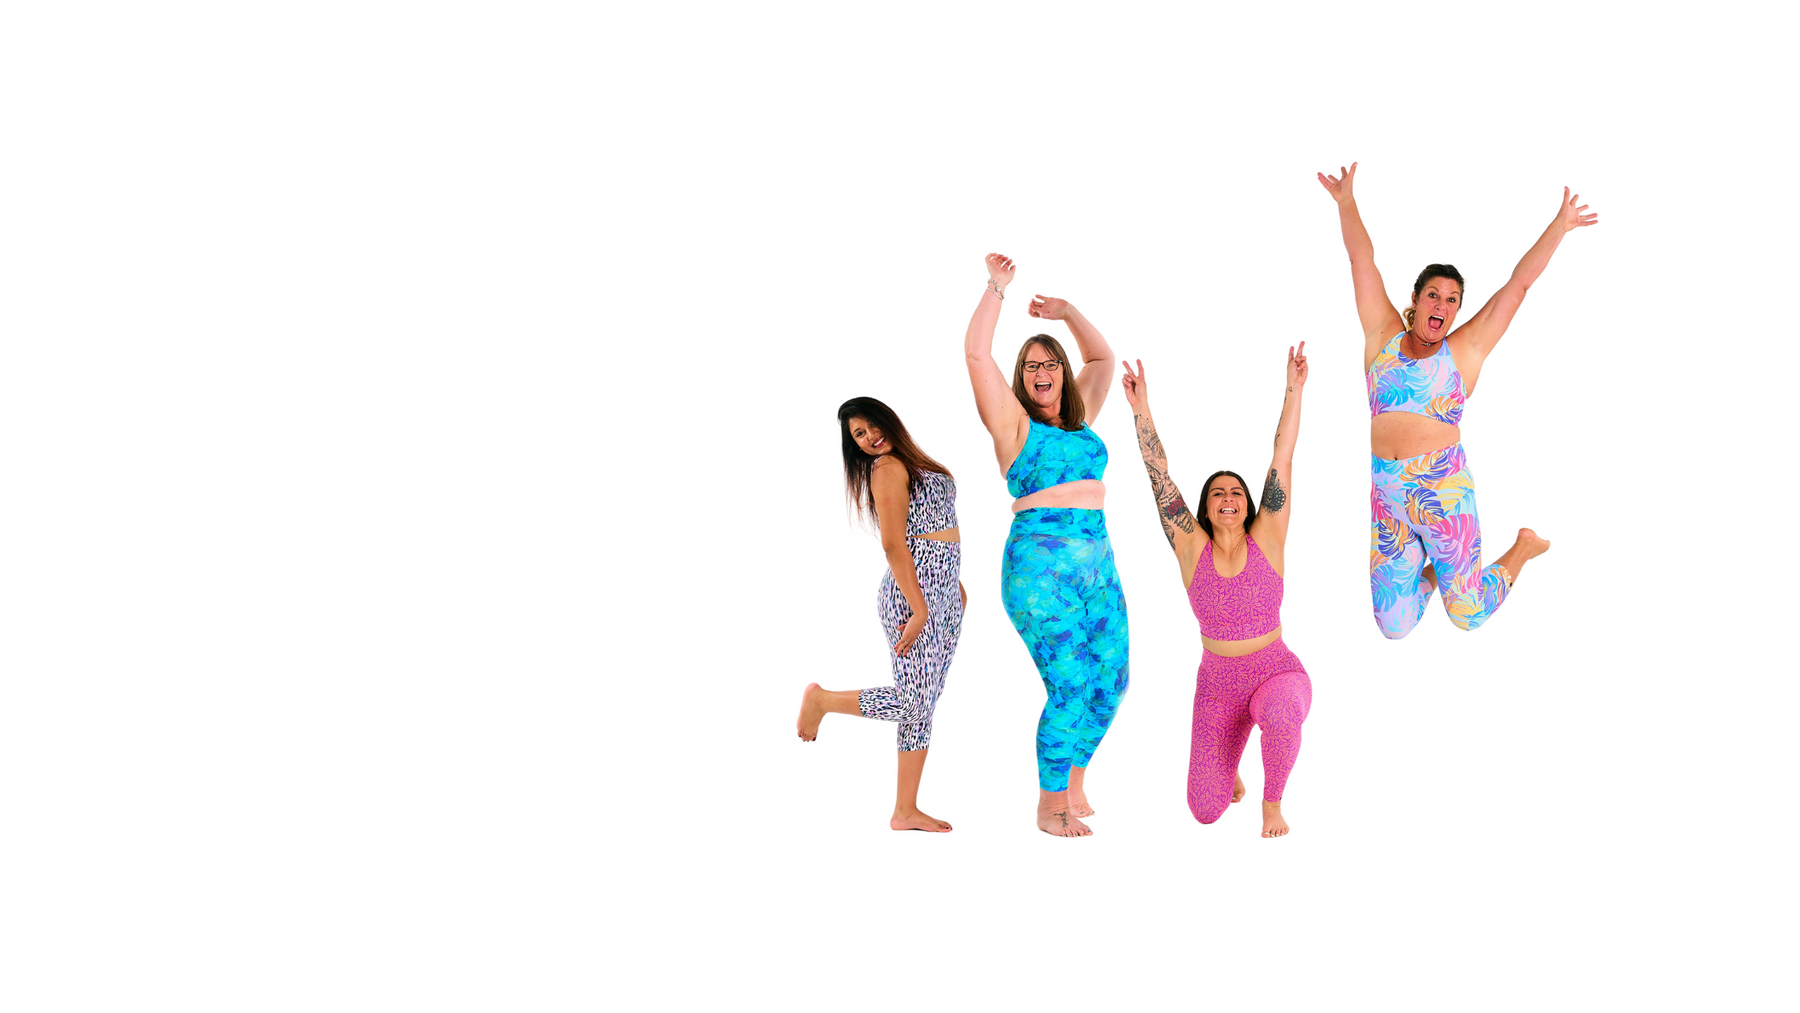 4 women jumping in bright activewear